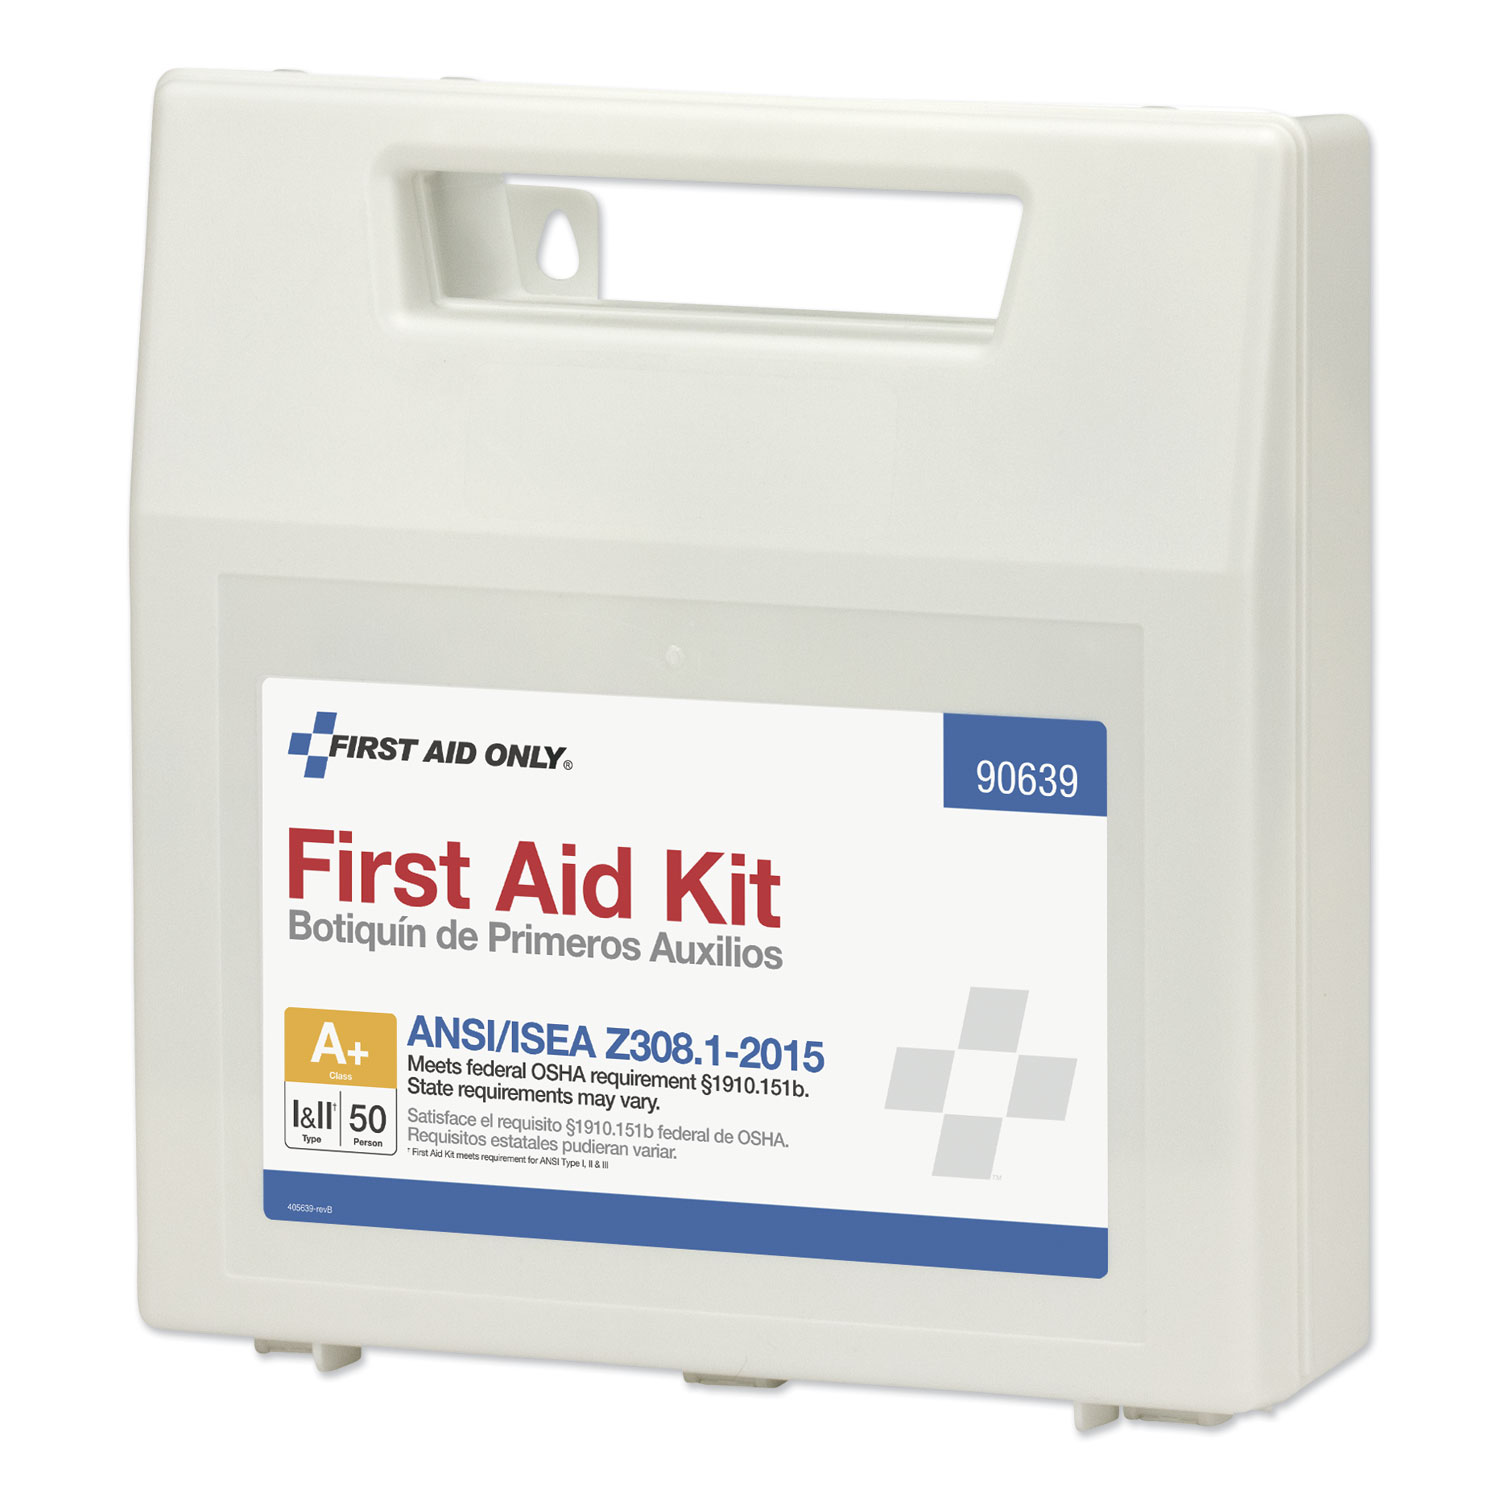 First Aid Only™ ANSI Class A+ First Aid Kit for 50 People, 183 Pieces,  Plastic Case Quipply